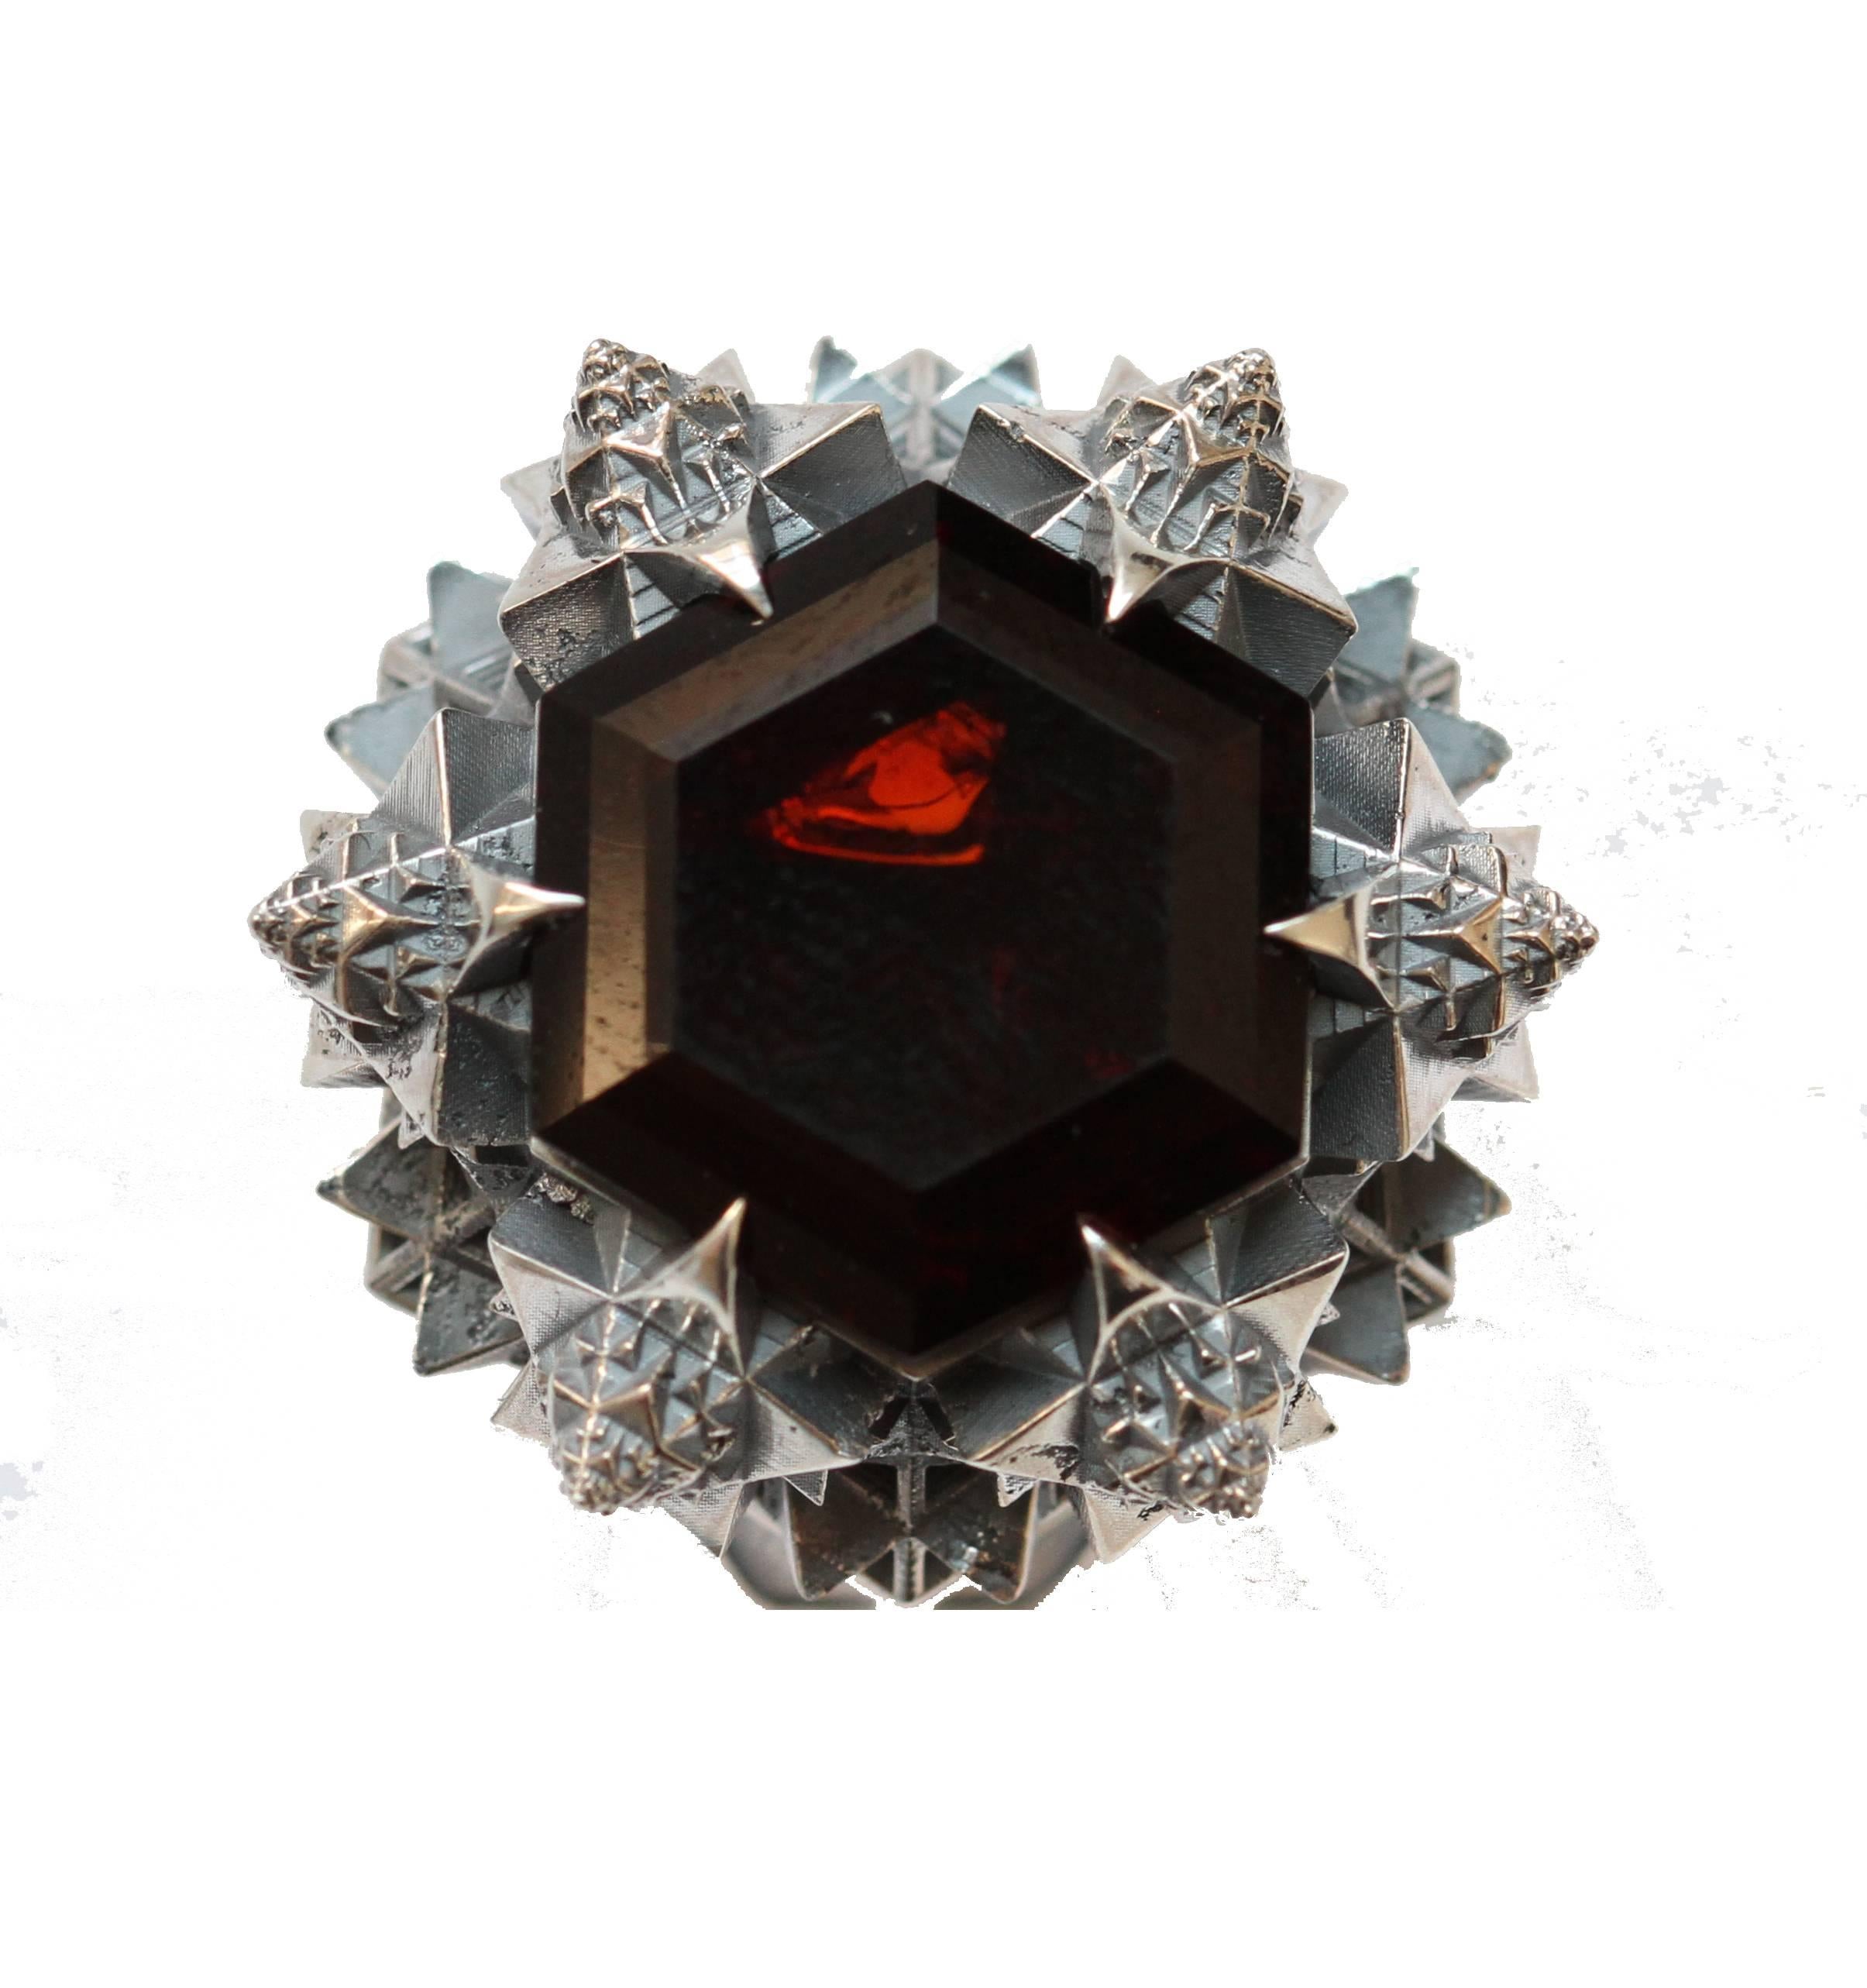 This ring was designed to evoke in ones life. Inspired by the universal birth and created using Thoscene, these pieces evoke a sense of stillness. Thoscene collection ring in sterling silver with a 14 mm Hessonite Garnet. 

John Brevard applies